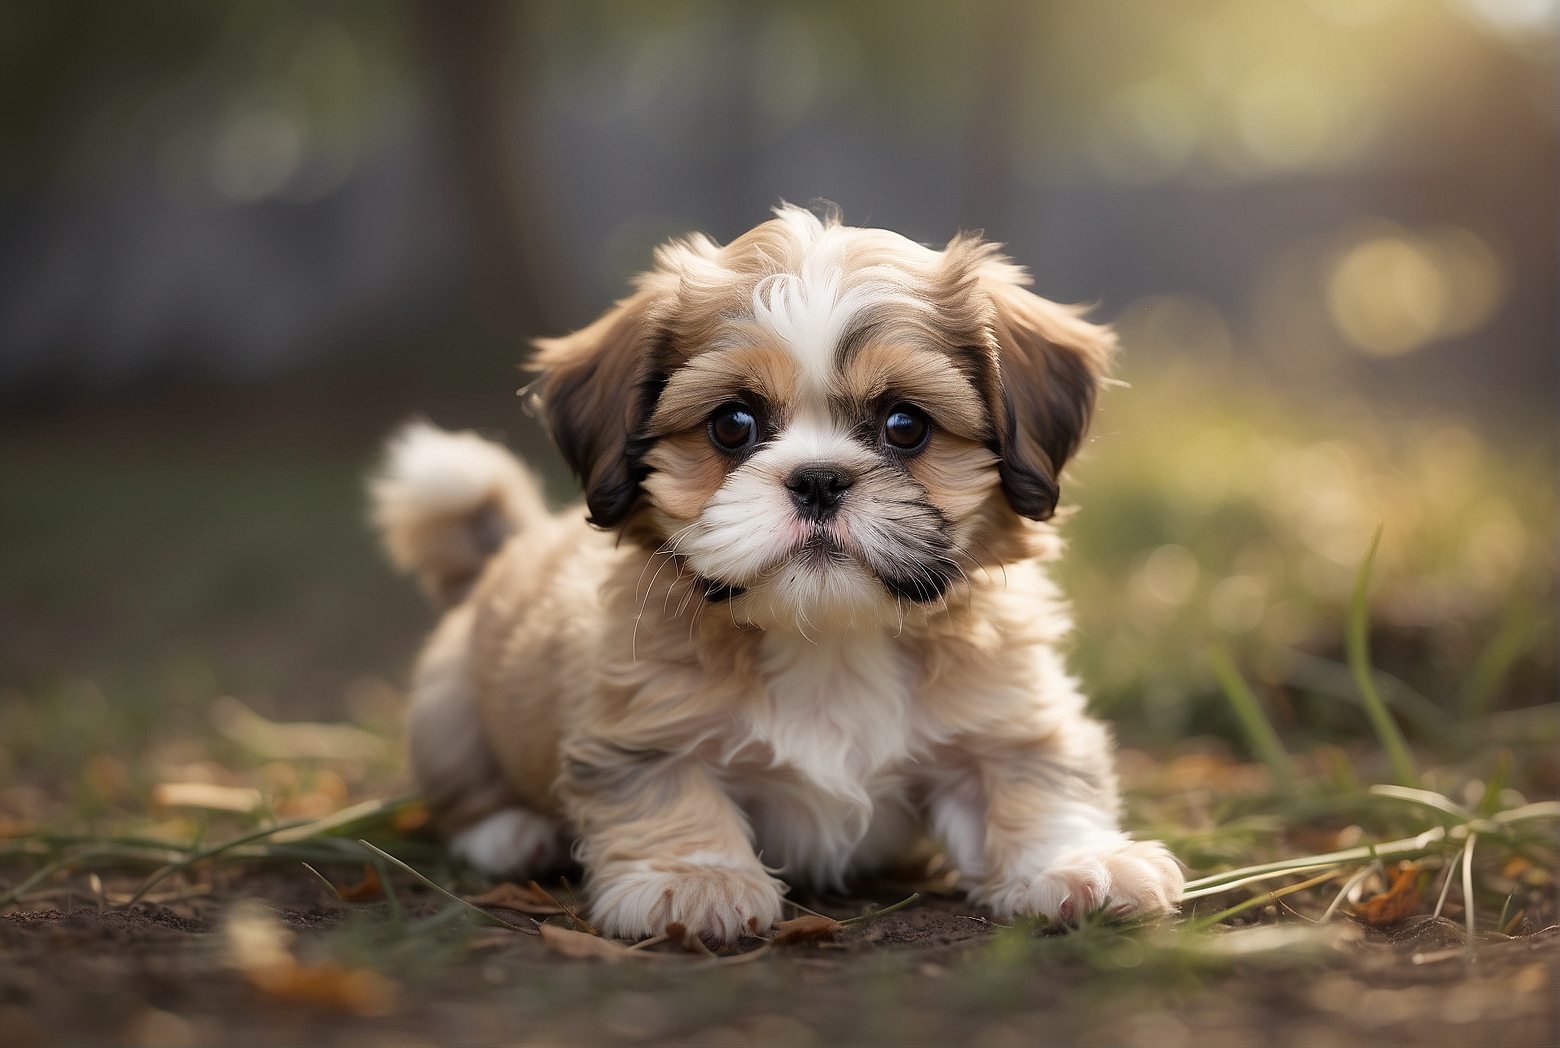 How Much Does a Shih Tzu Puppy Cost?